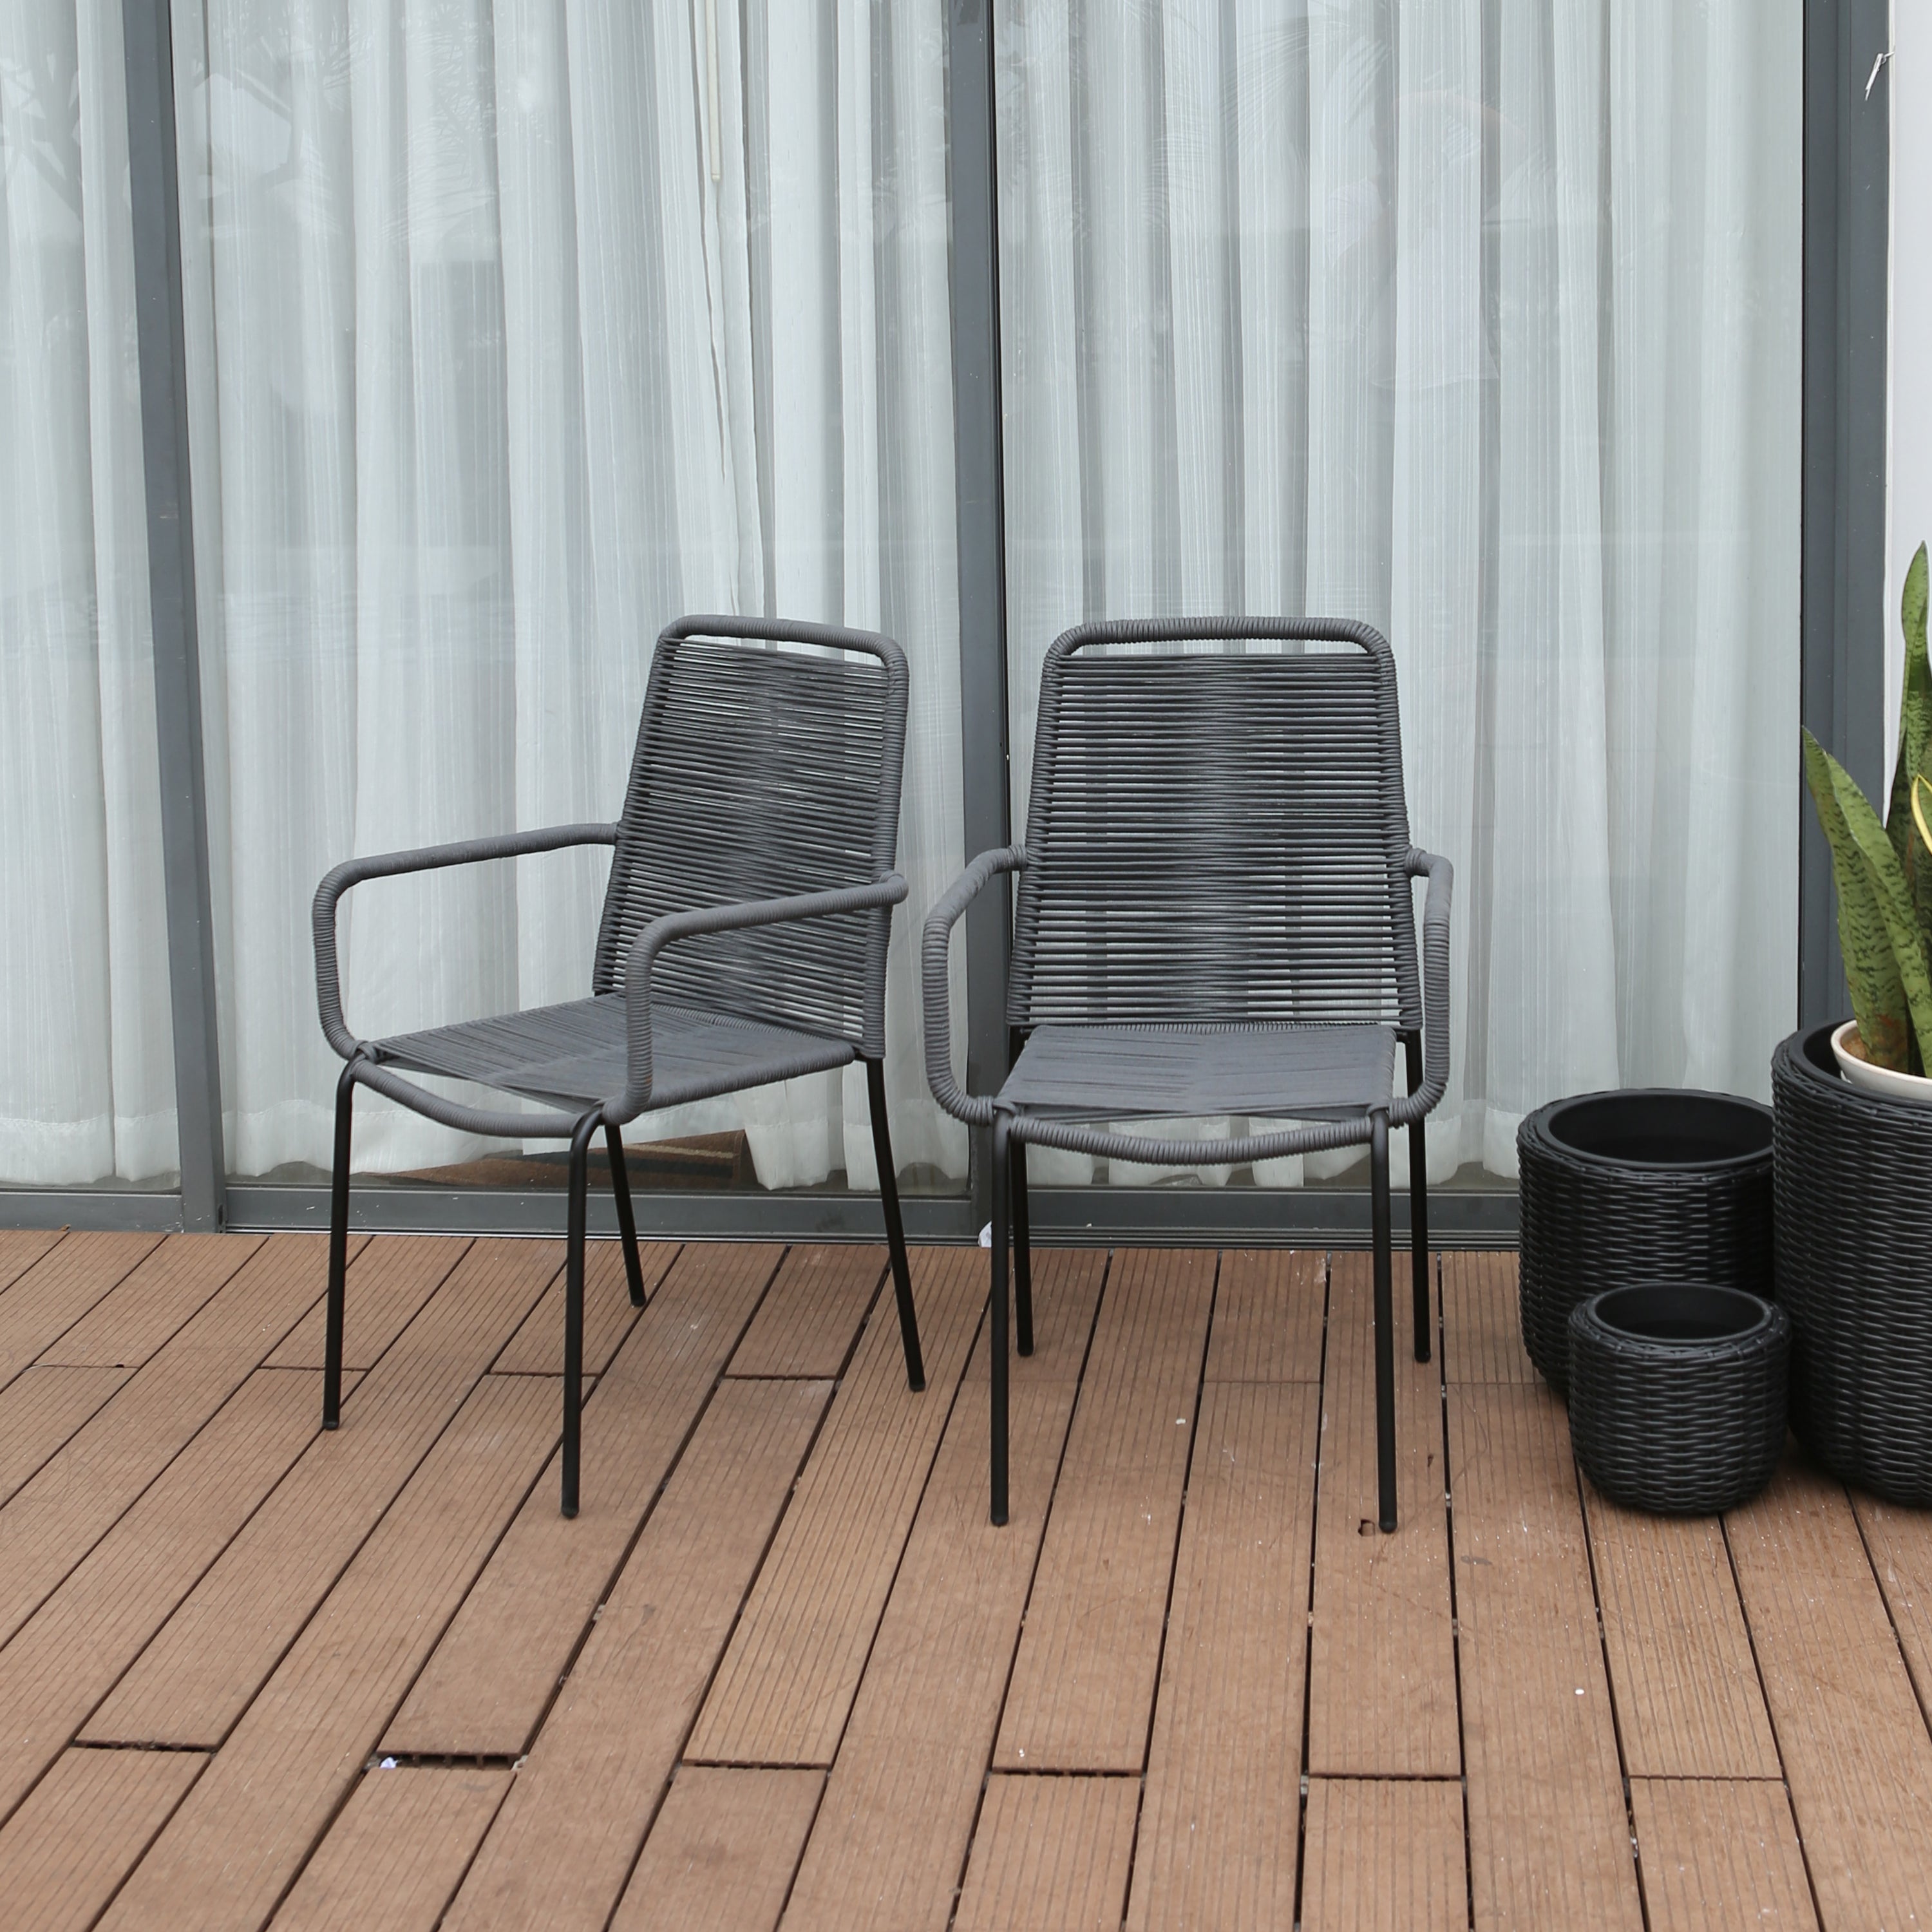 Enhance Your Outdoor Space with Stylish Wicker Corner Sofa Set and Outdoor Rope Dining Chairs